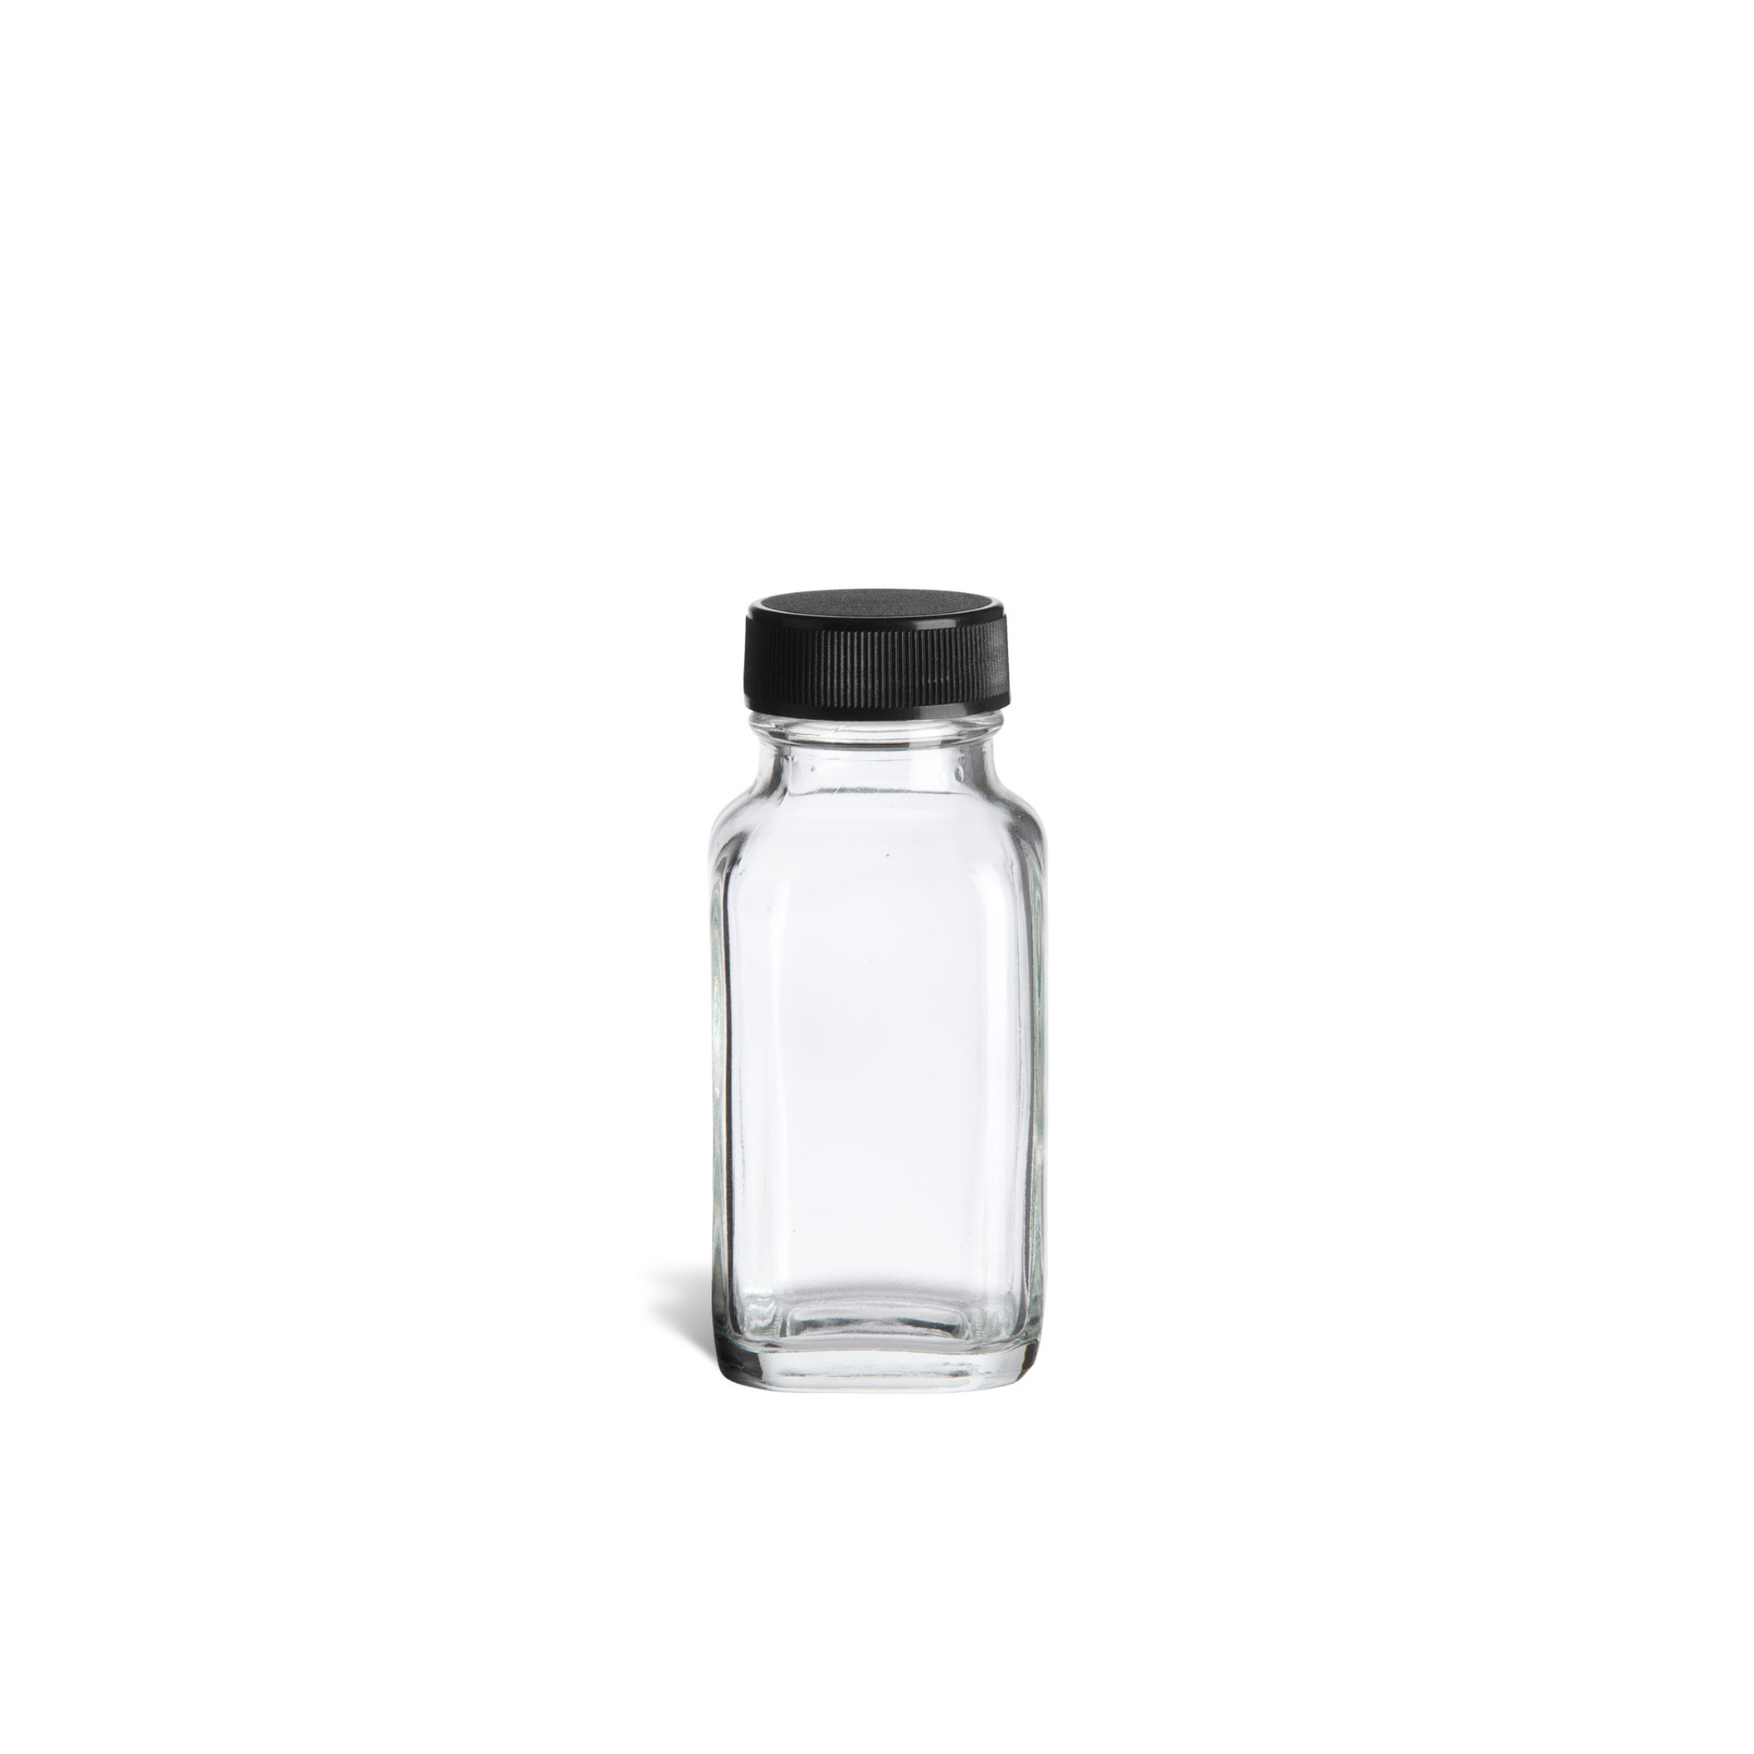 French Square Glass Jars With Lid 2 Oz